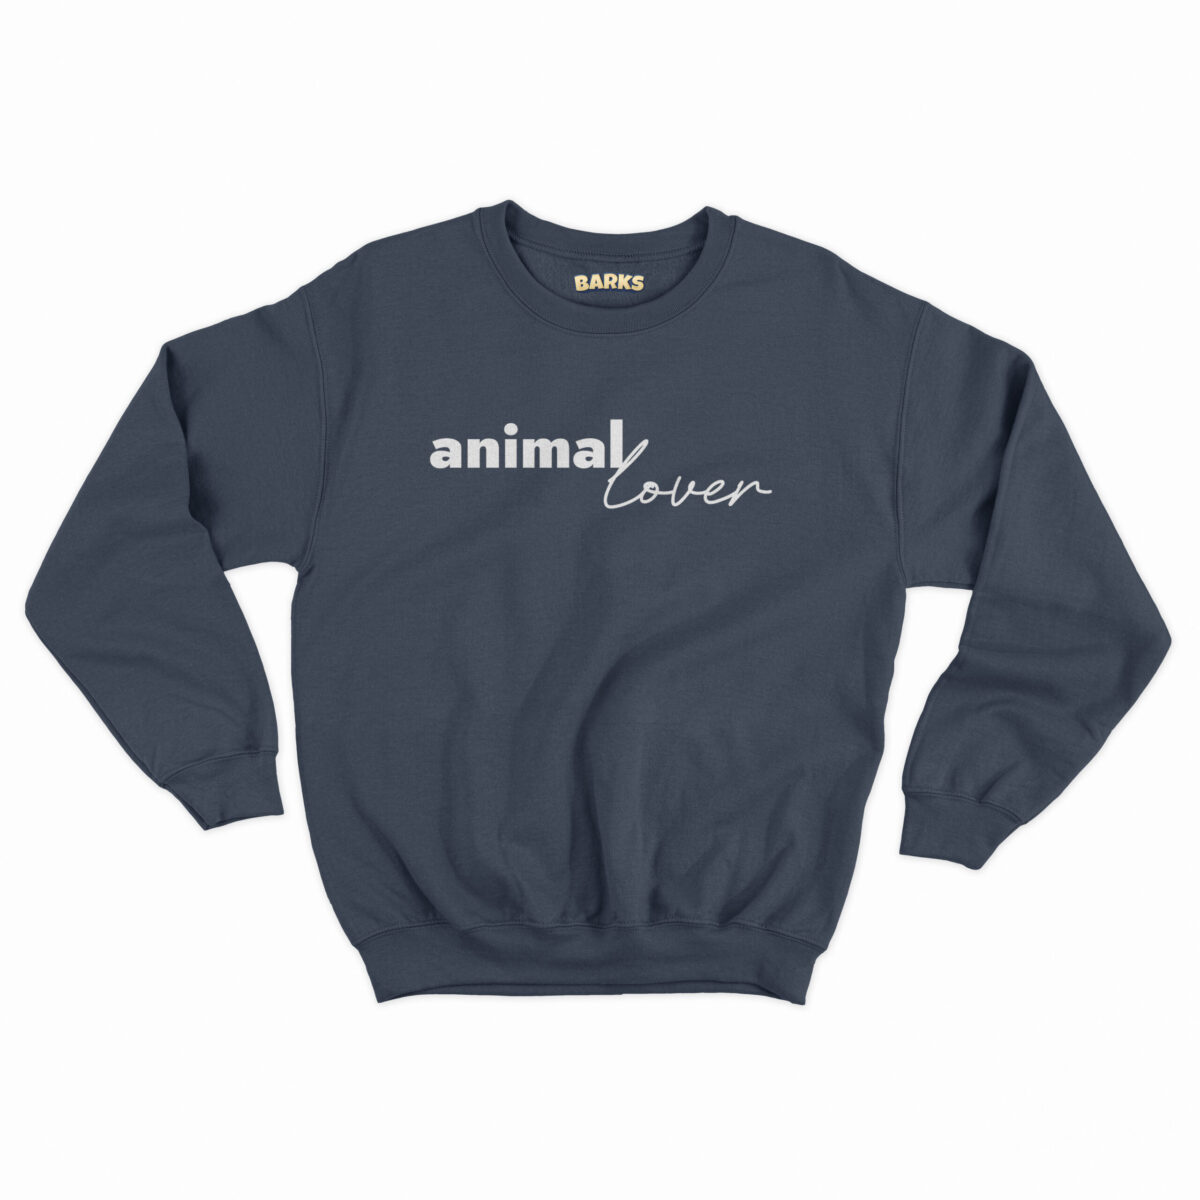 barks sweater animal lover french navy scaled